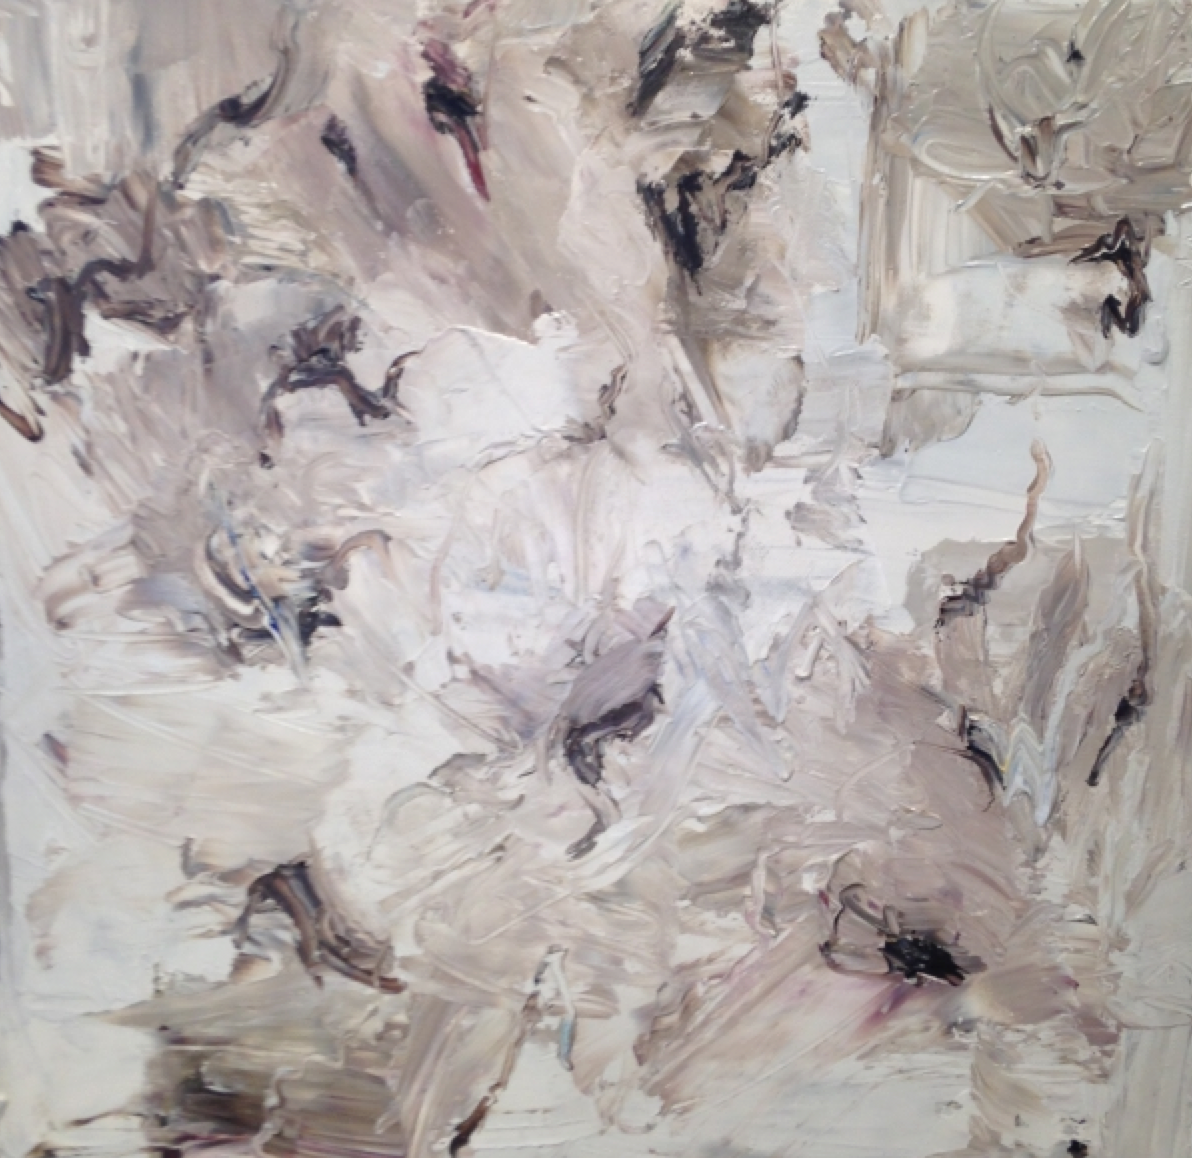  # 24  Neutral Motion  by Jodie Maurer  24" x 24" | Oil | $1,400.00     Status: Available  Current Location:  C. Parker Gallery  